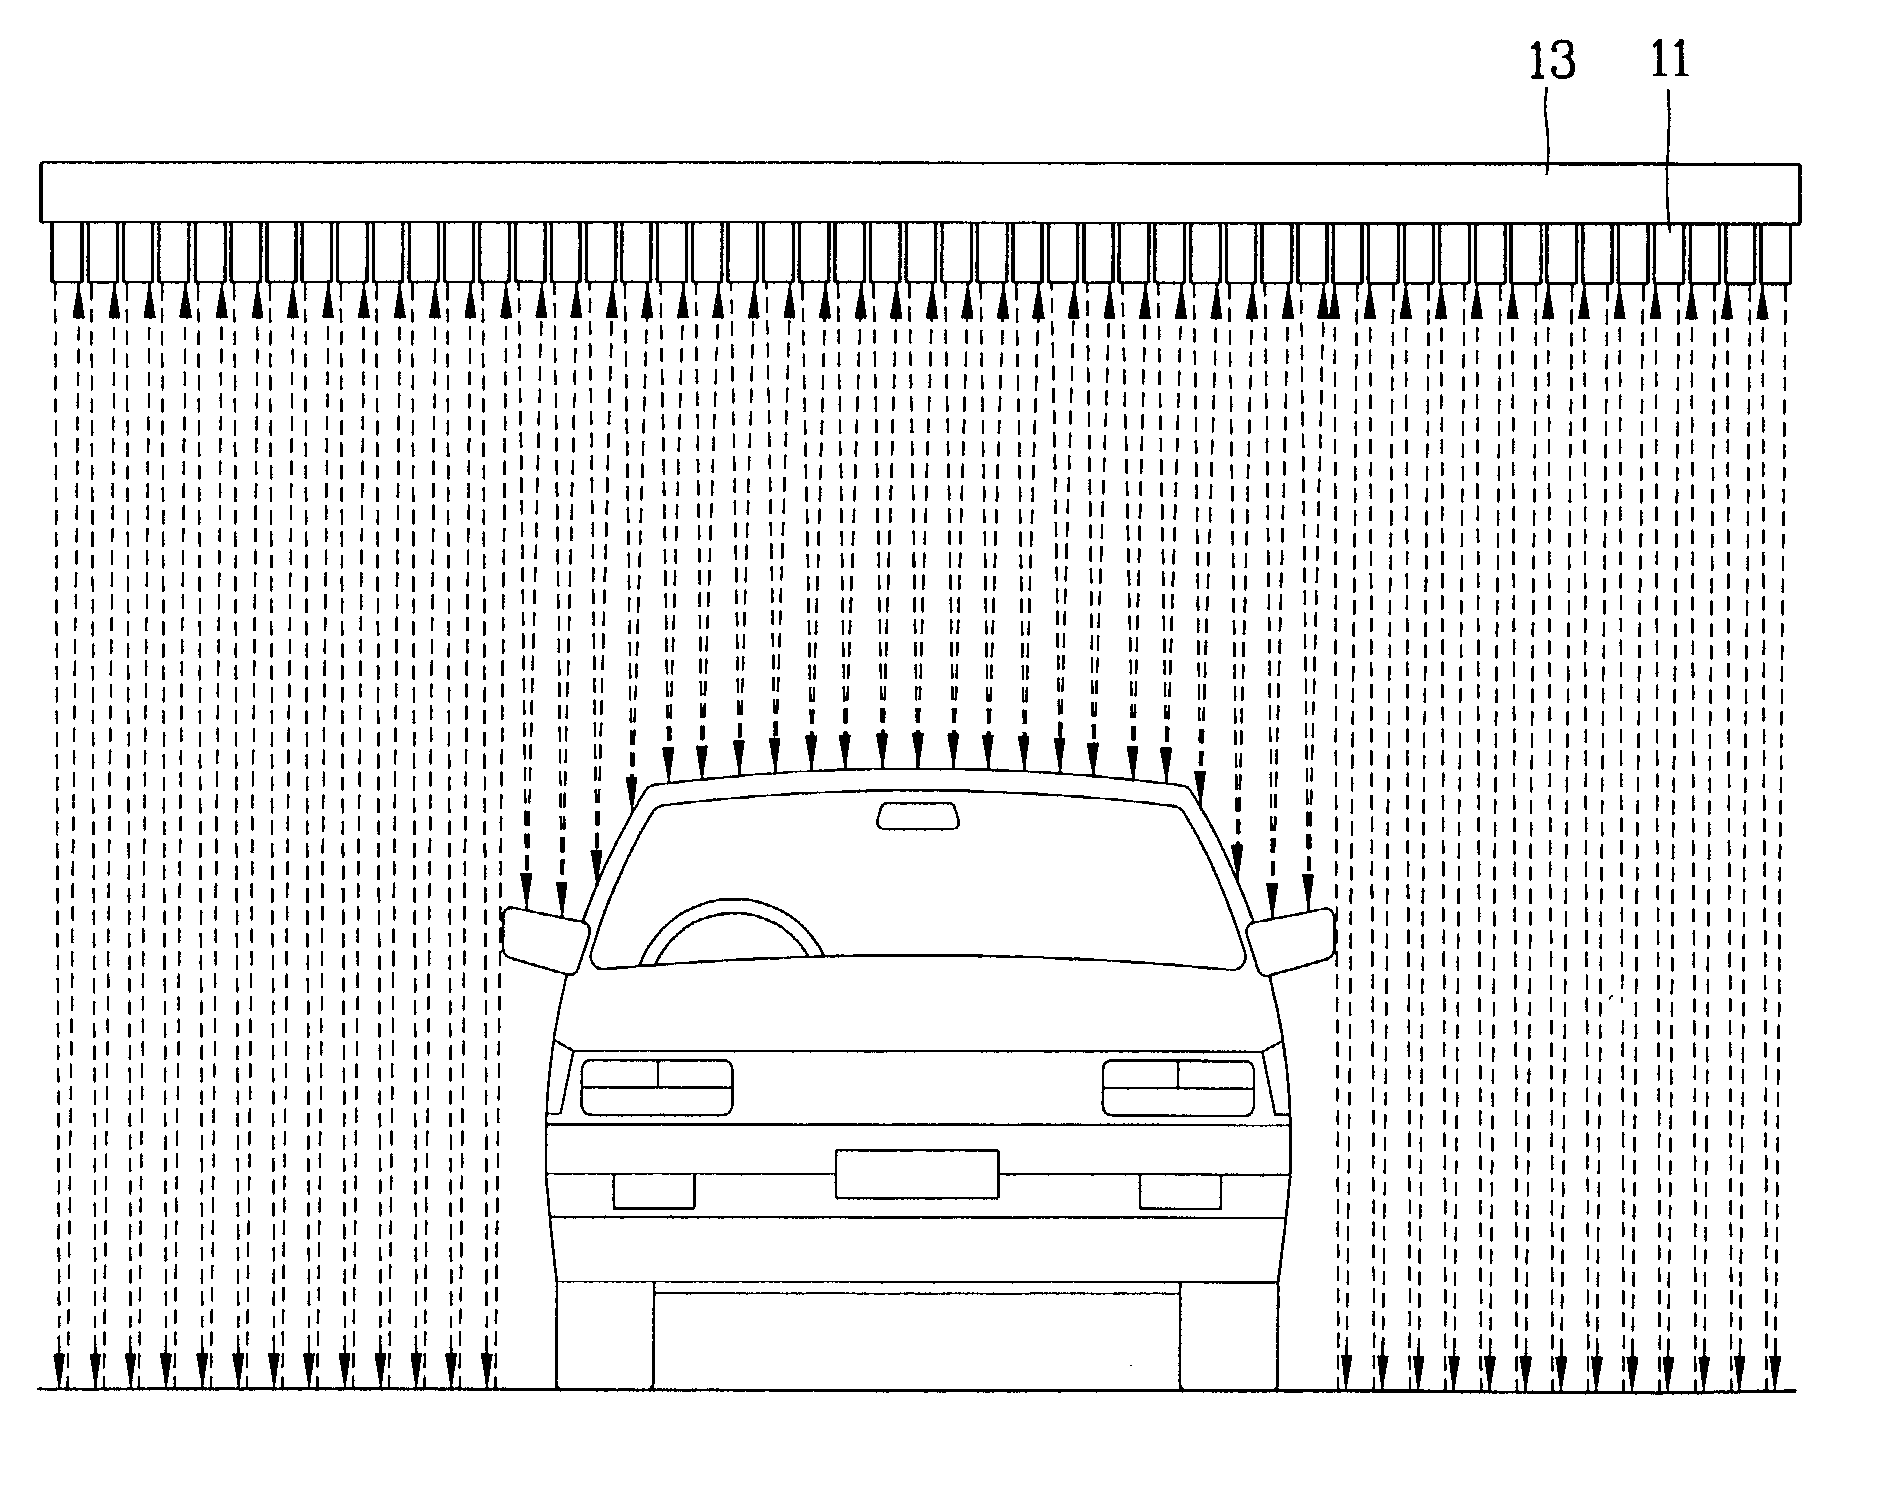 Vehicle measuring apparatus and method for toll collection system